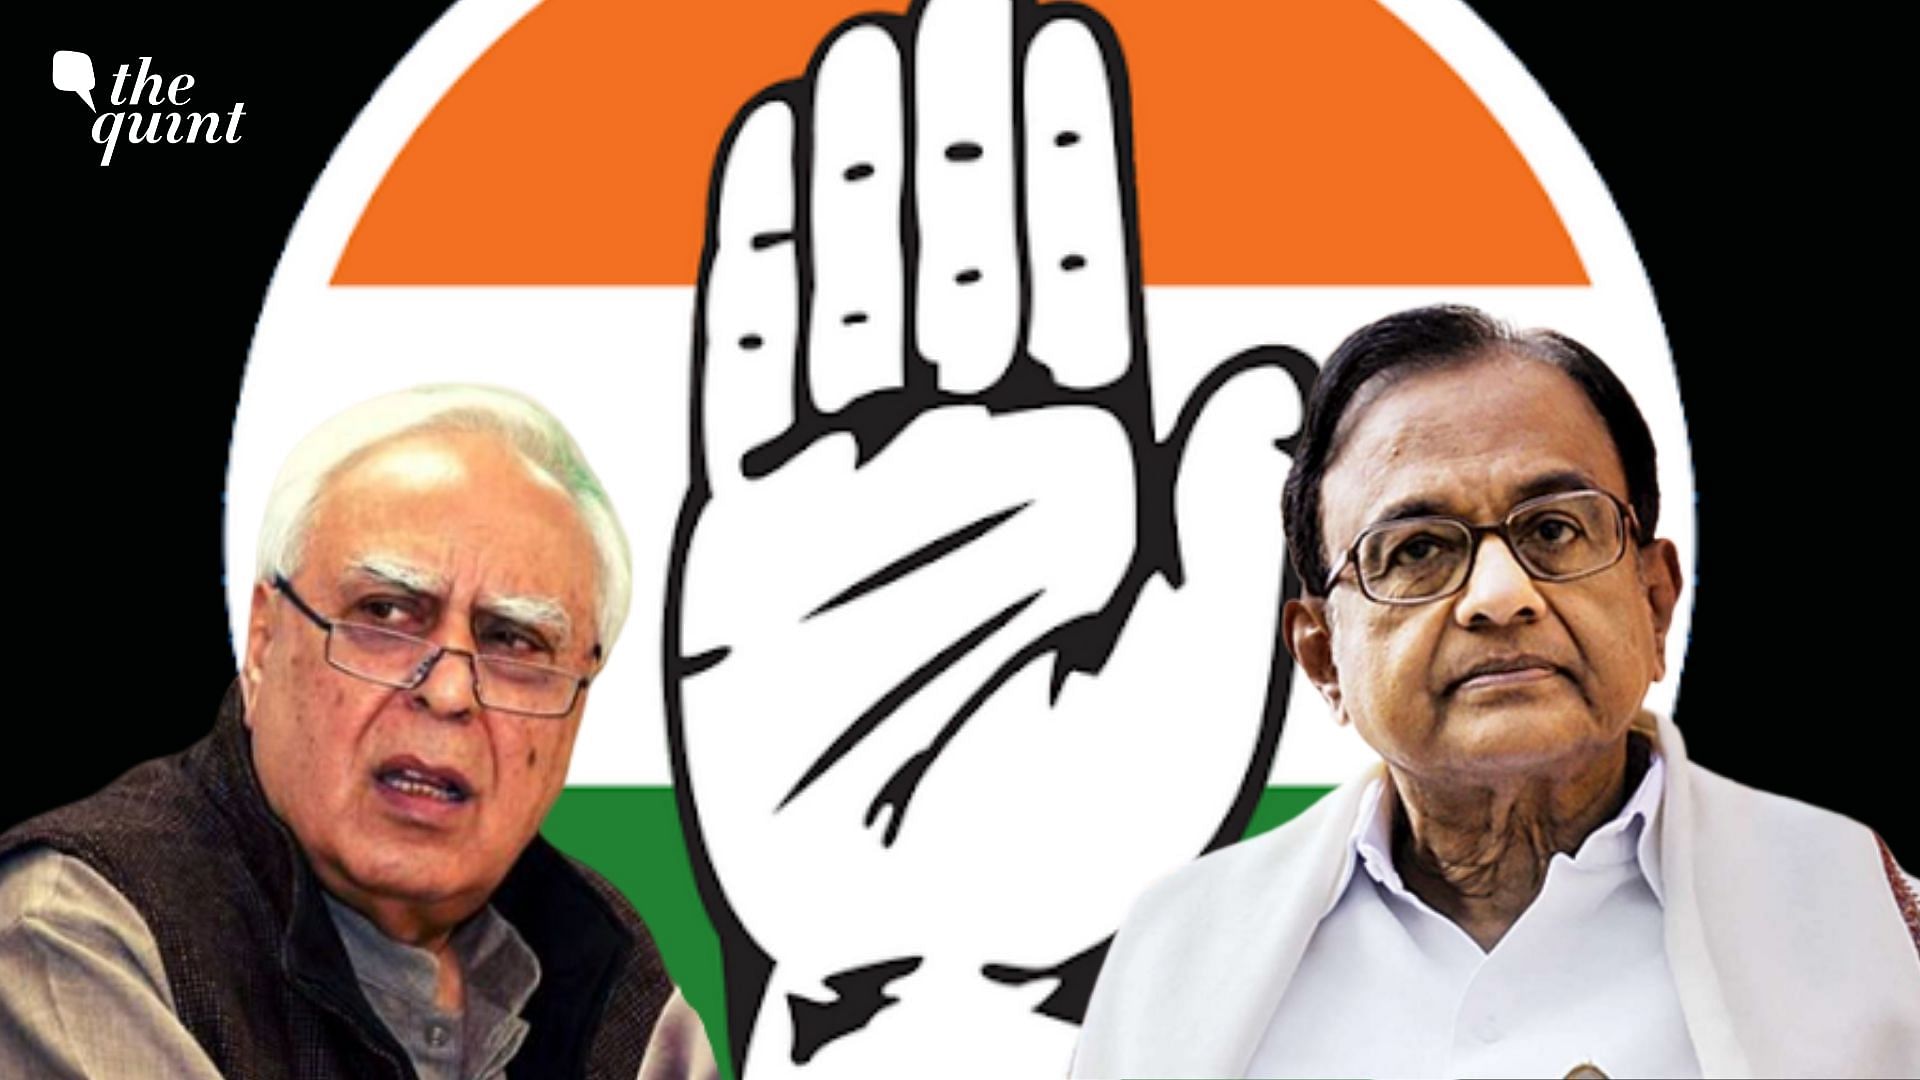 P Chidambaram suggested that the Congress party might have contested more seats in the state than it should have.